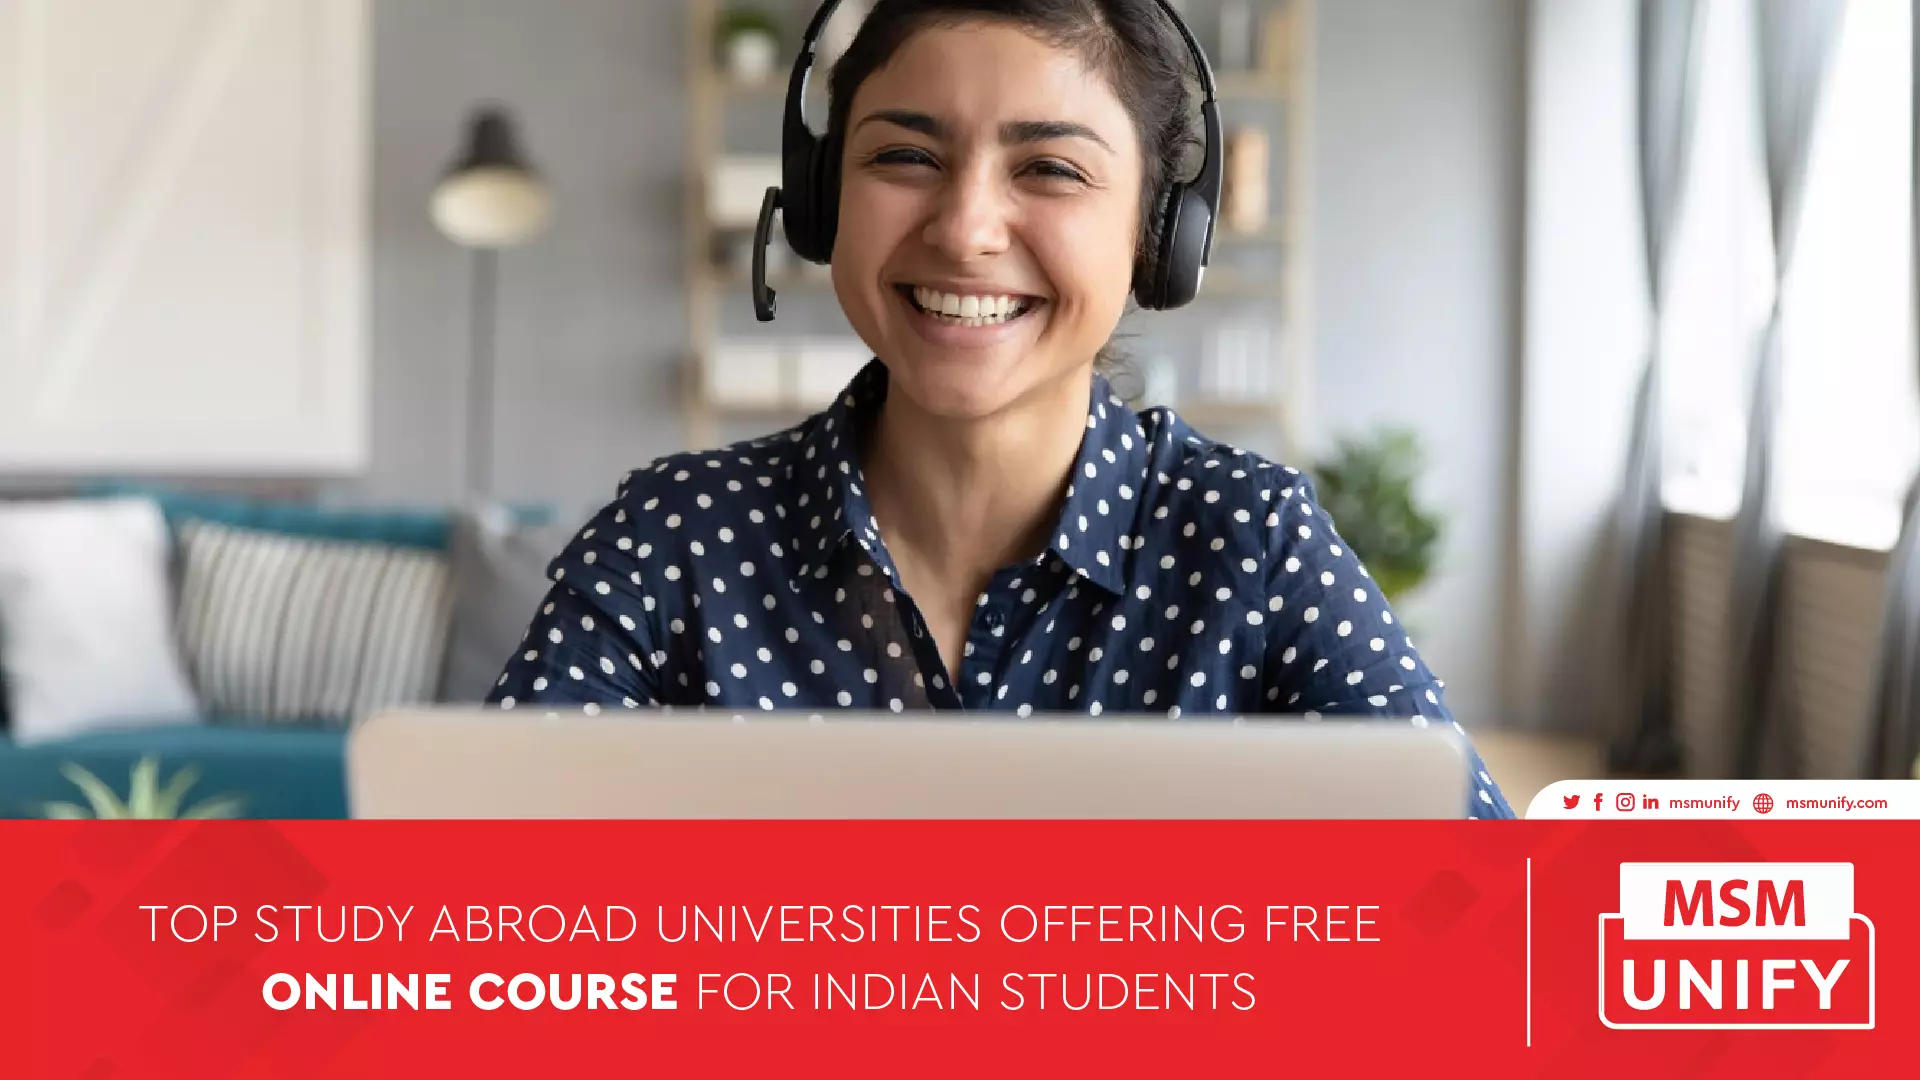 MSM Unify Top study abroad universities offering free online course for Indian students